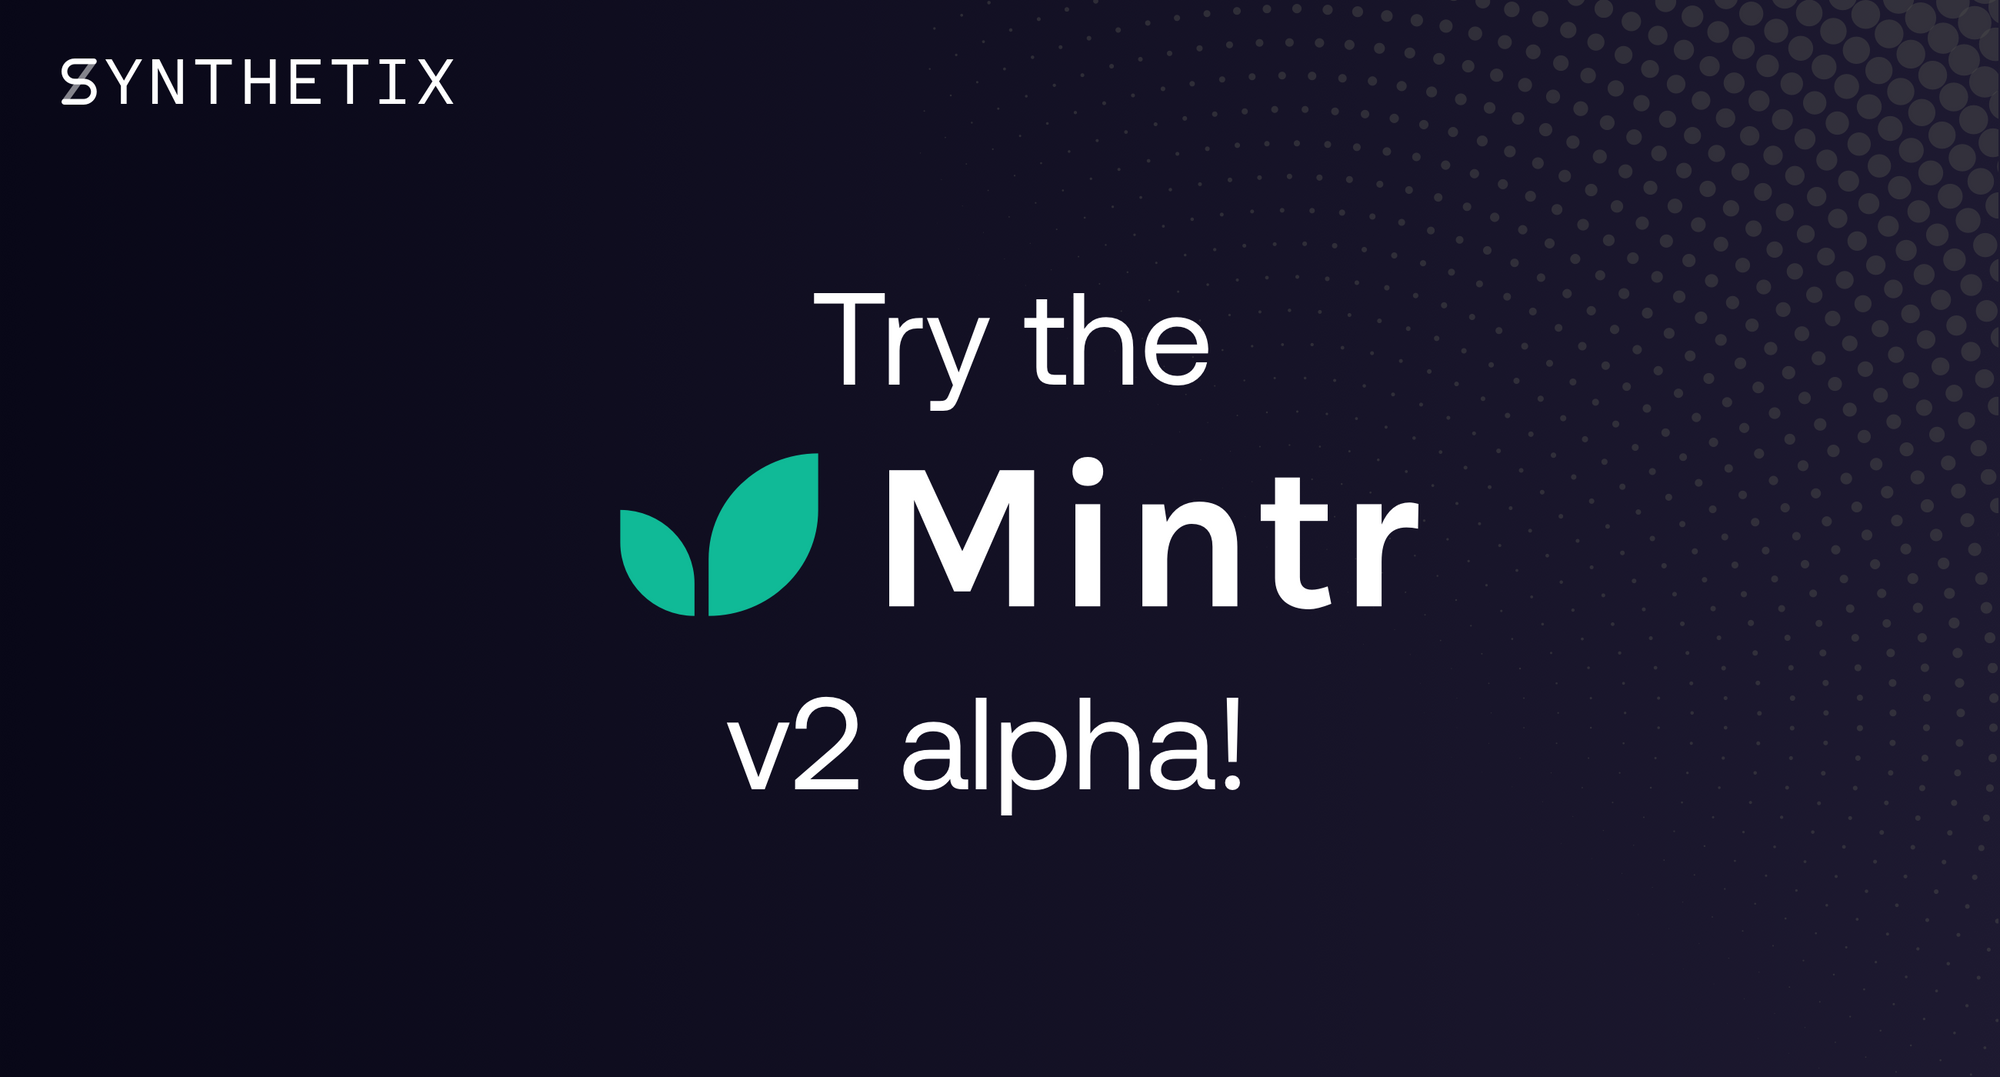 Try out the alpha version of Mintr v2!